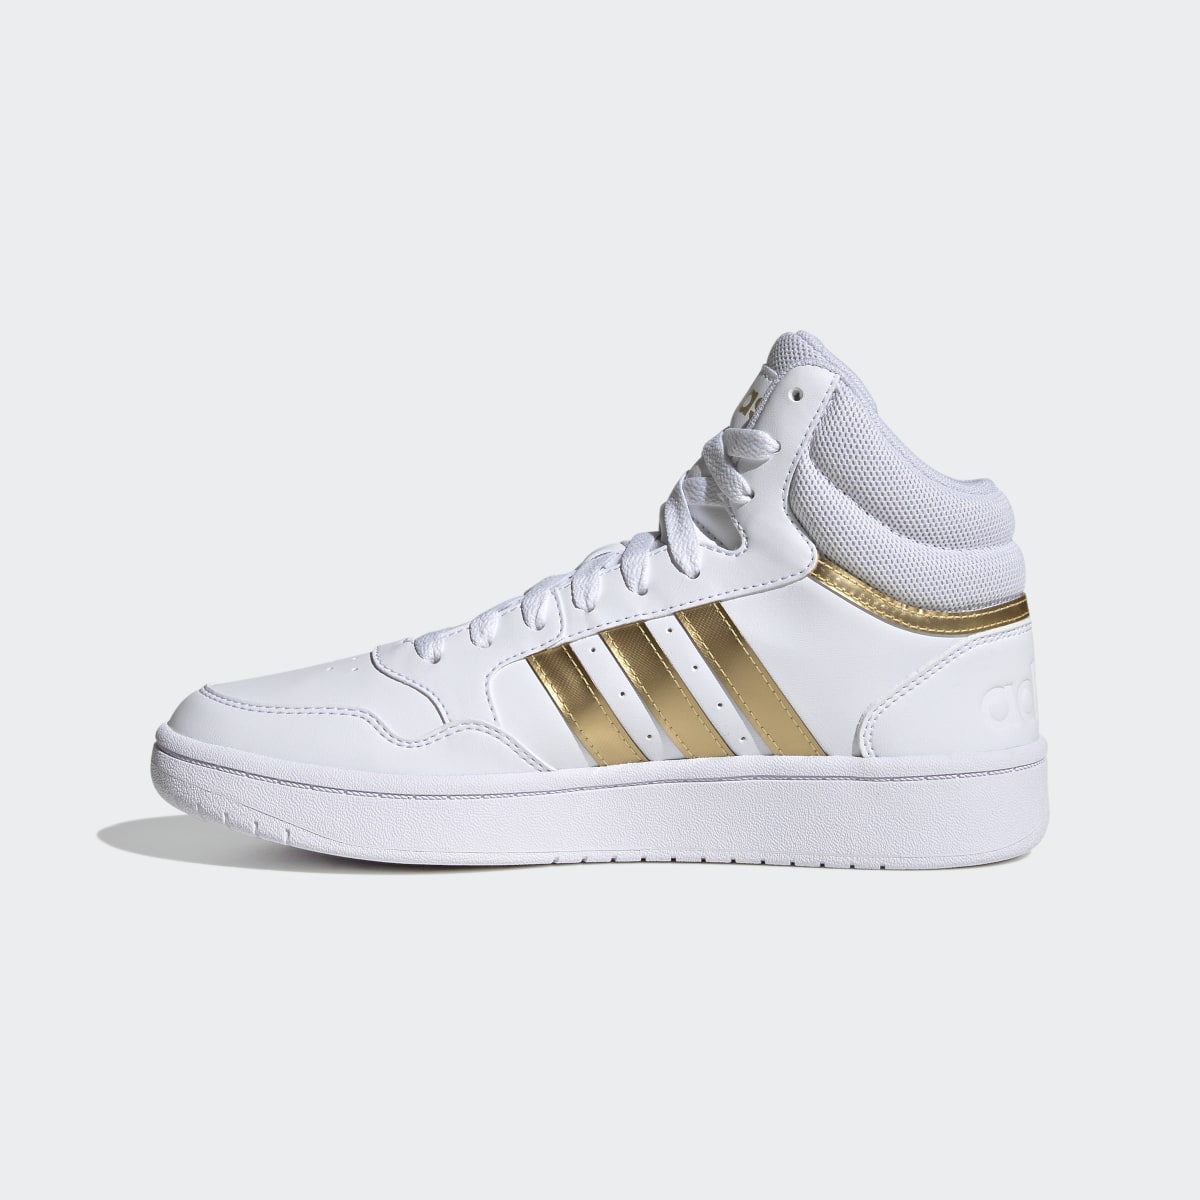 Adidas Hoops 3.0 Mid Lifestyle Basketball Classic Shoes. 7